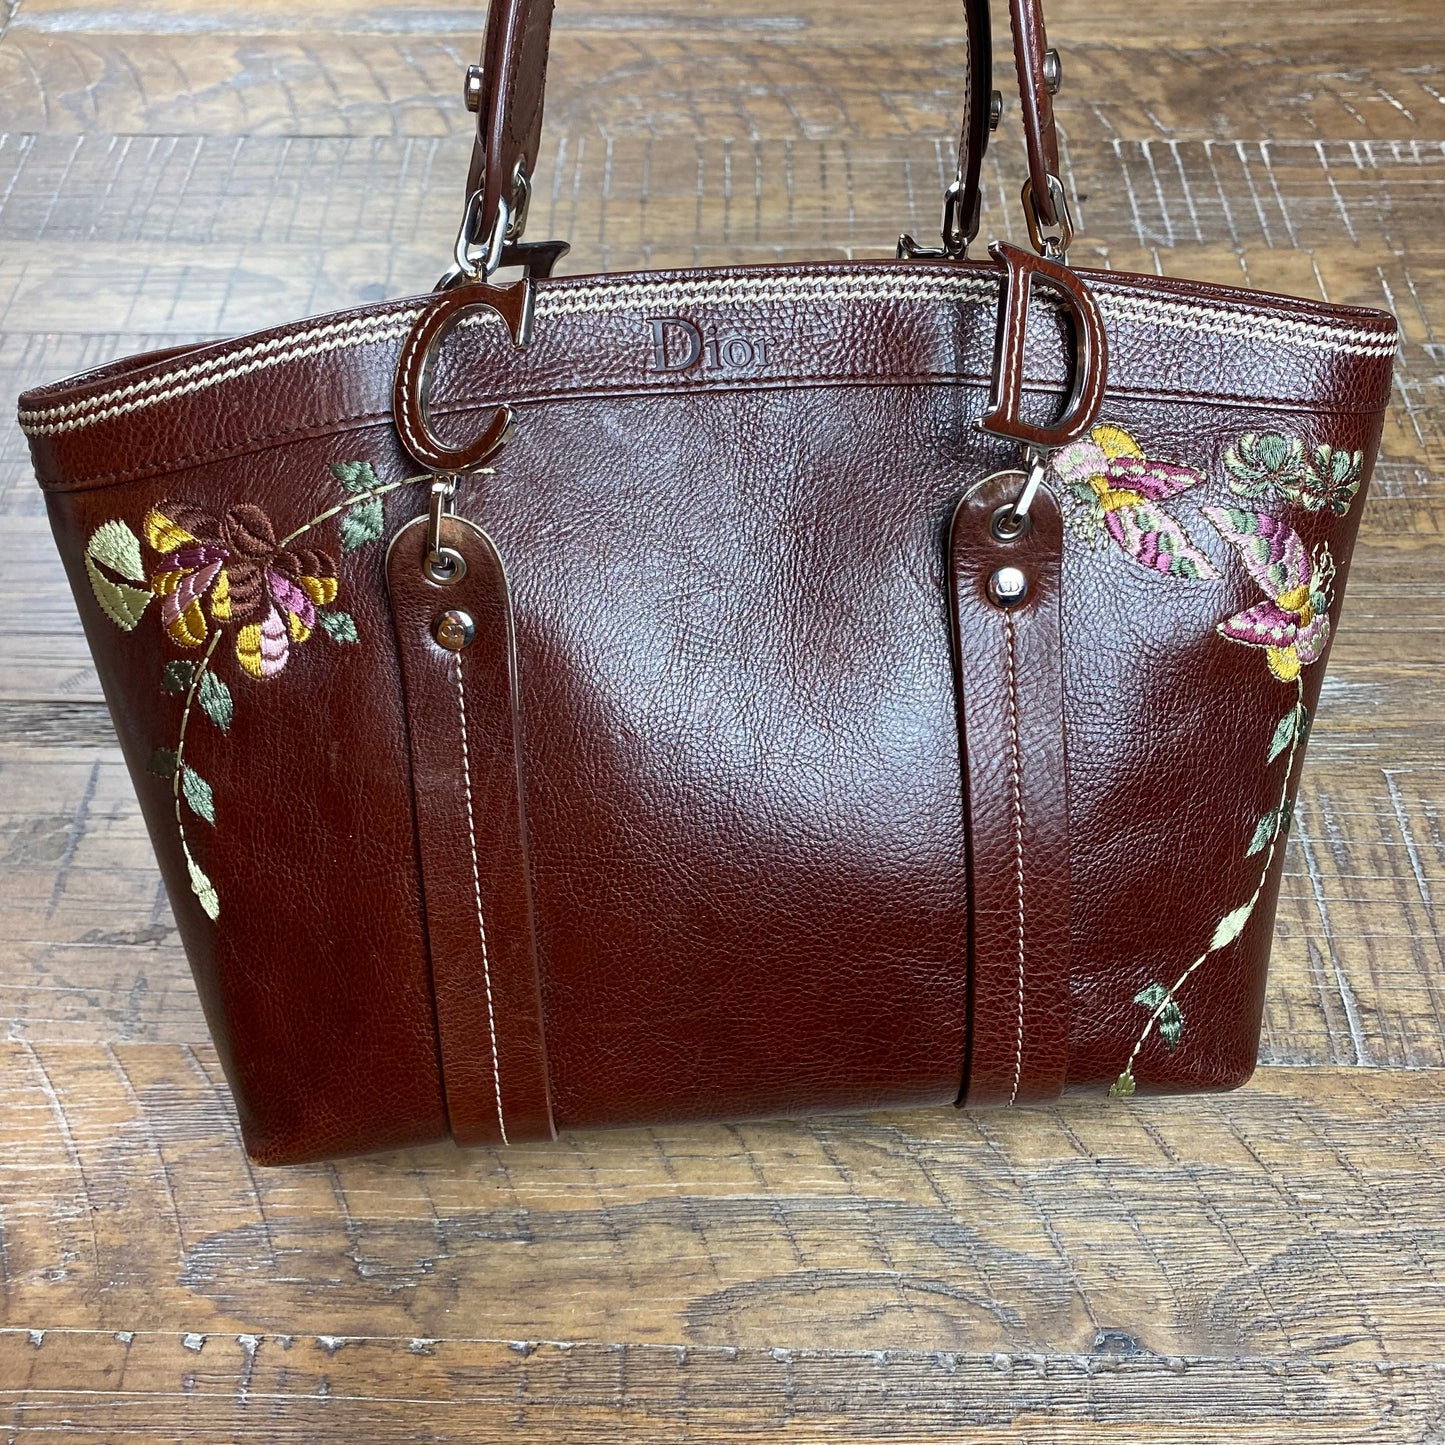 Christian Dior Romantic Flowers Leather Tote